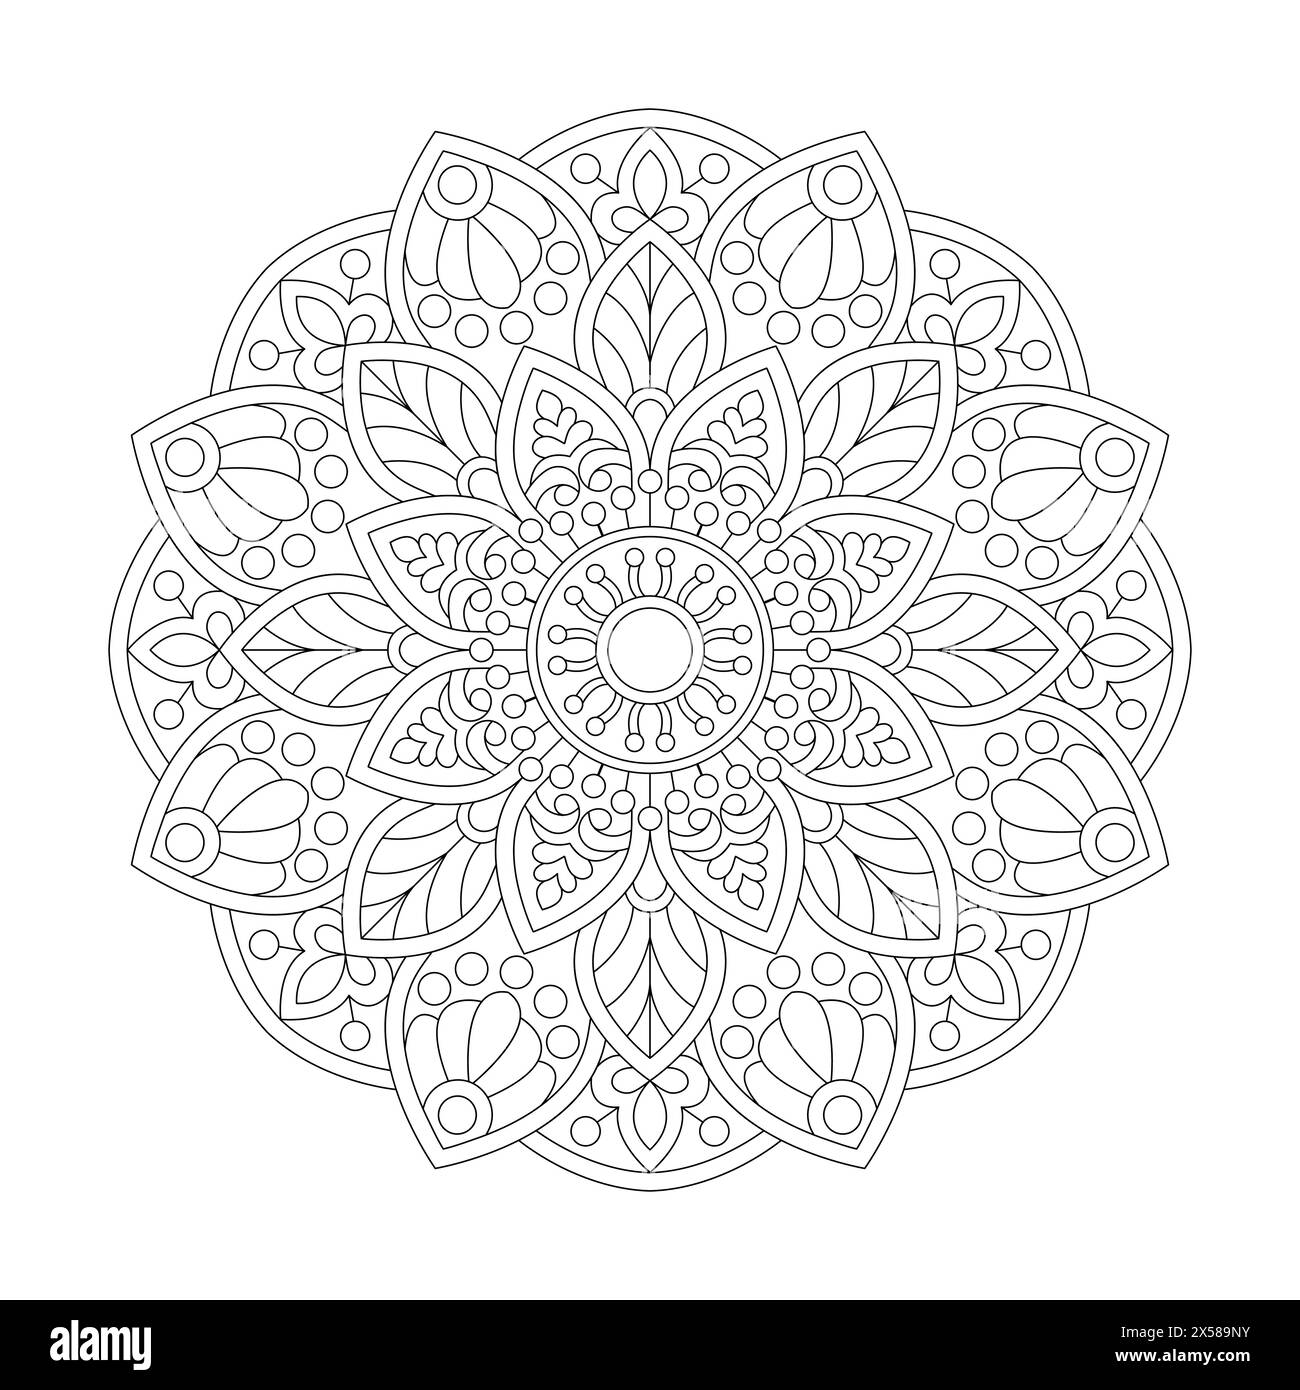 Ethereal Enigma Mandala Coloring Book Page for kdp Book Interior. Peaceful Petals, Ability to Relax, Brain Experiences, Harmonious Haven, Peaceful Por Stock Vector